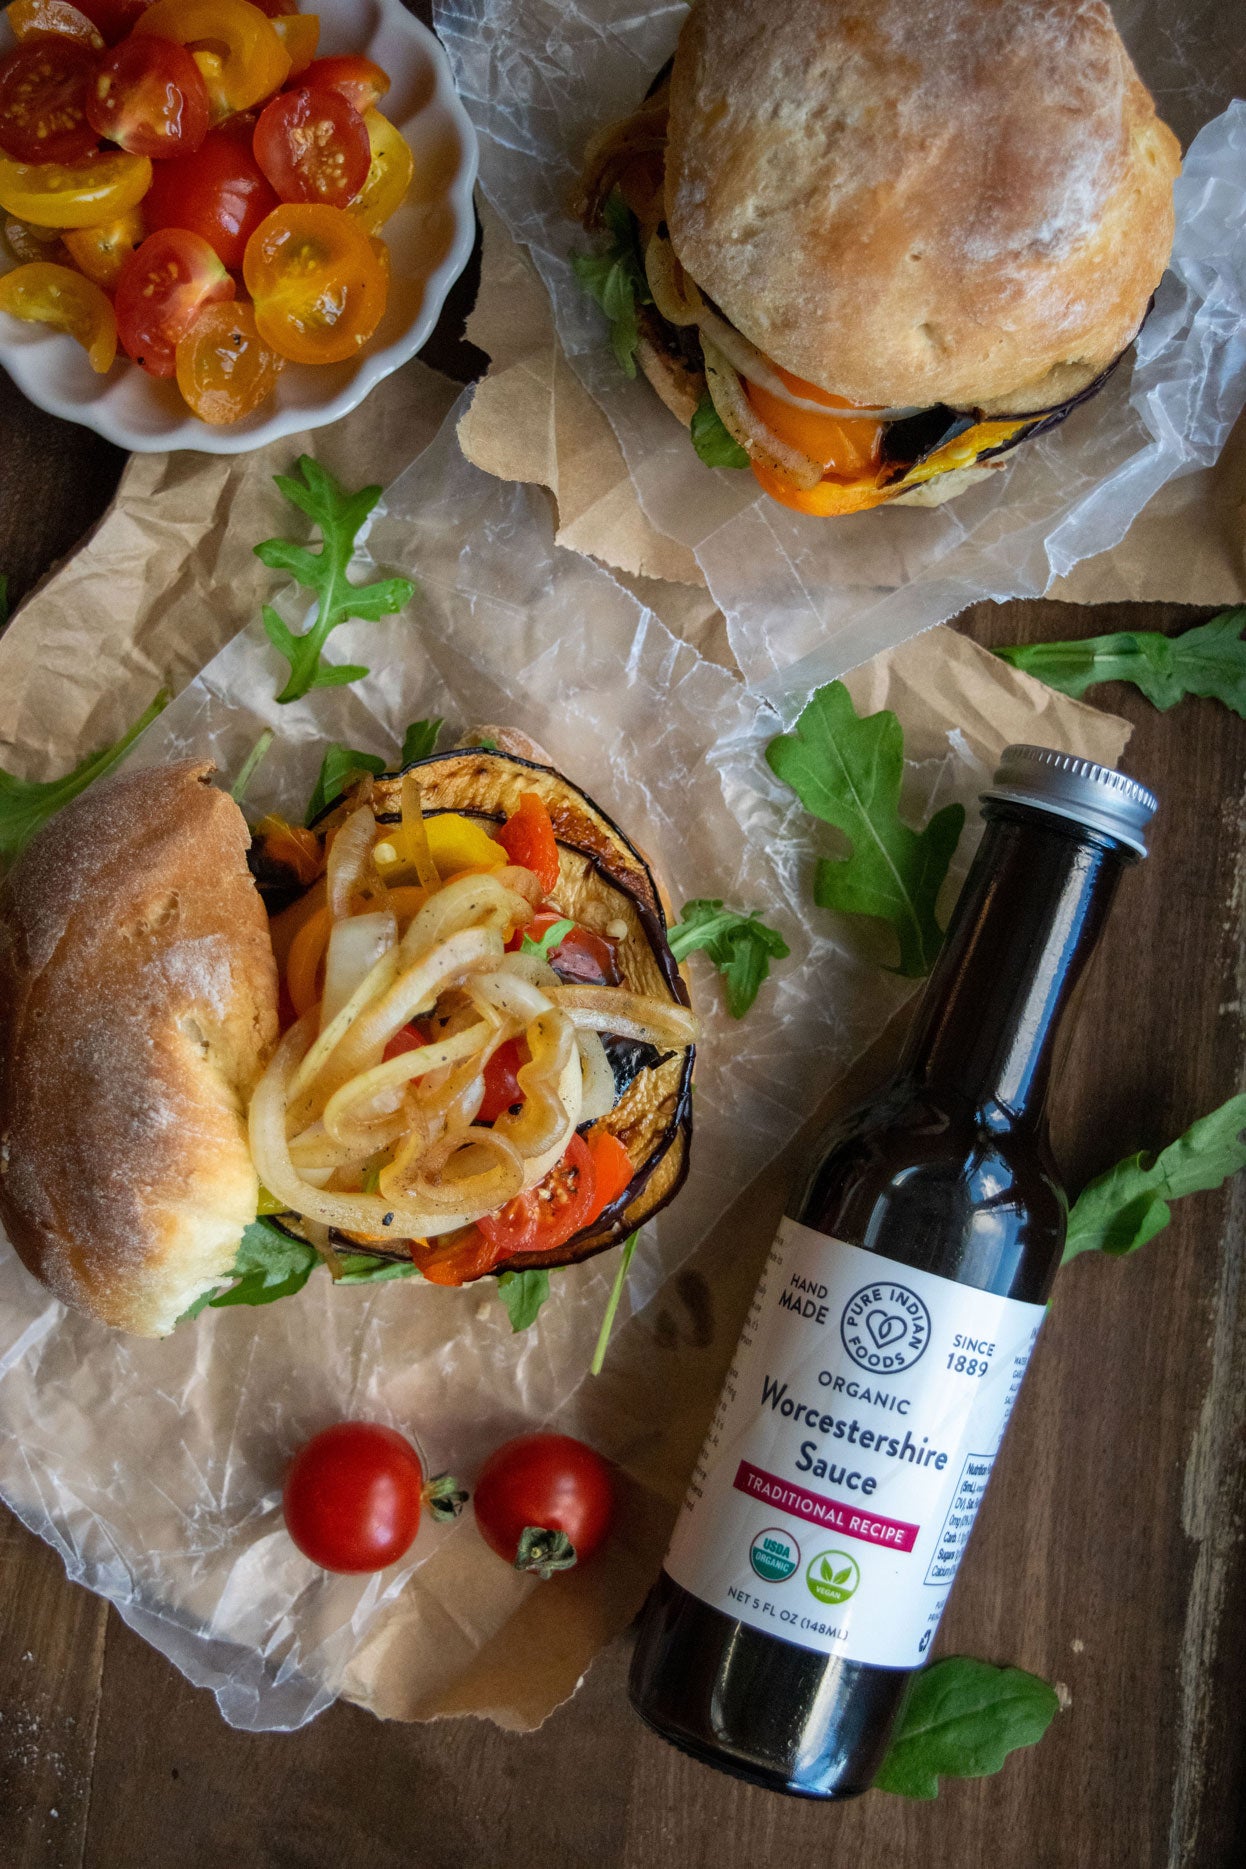 Gorgeous portobello mushroom burgers made with Pure Indian Foods Organic Worcestershire Sauce